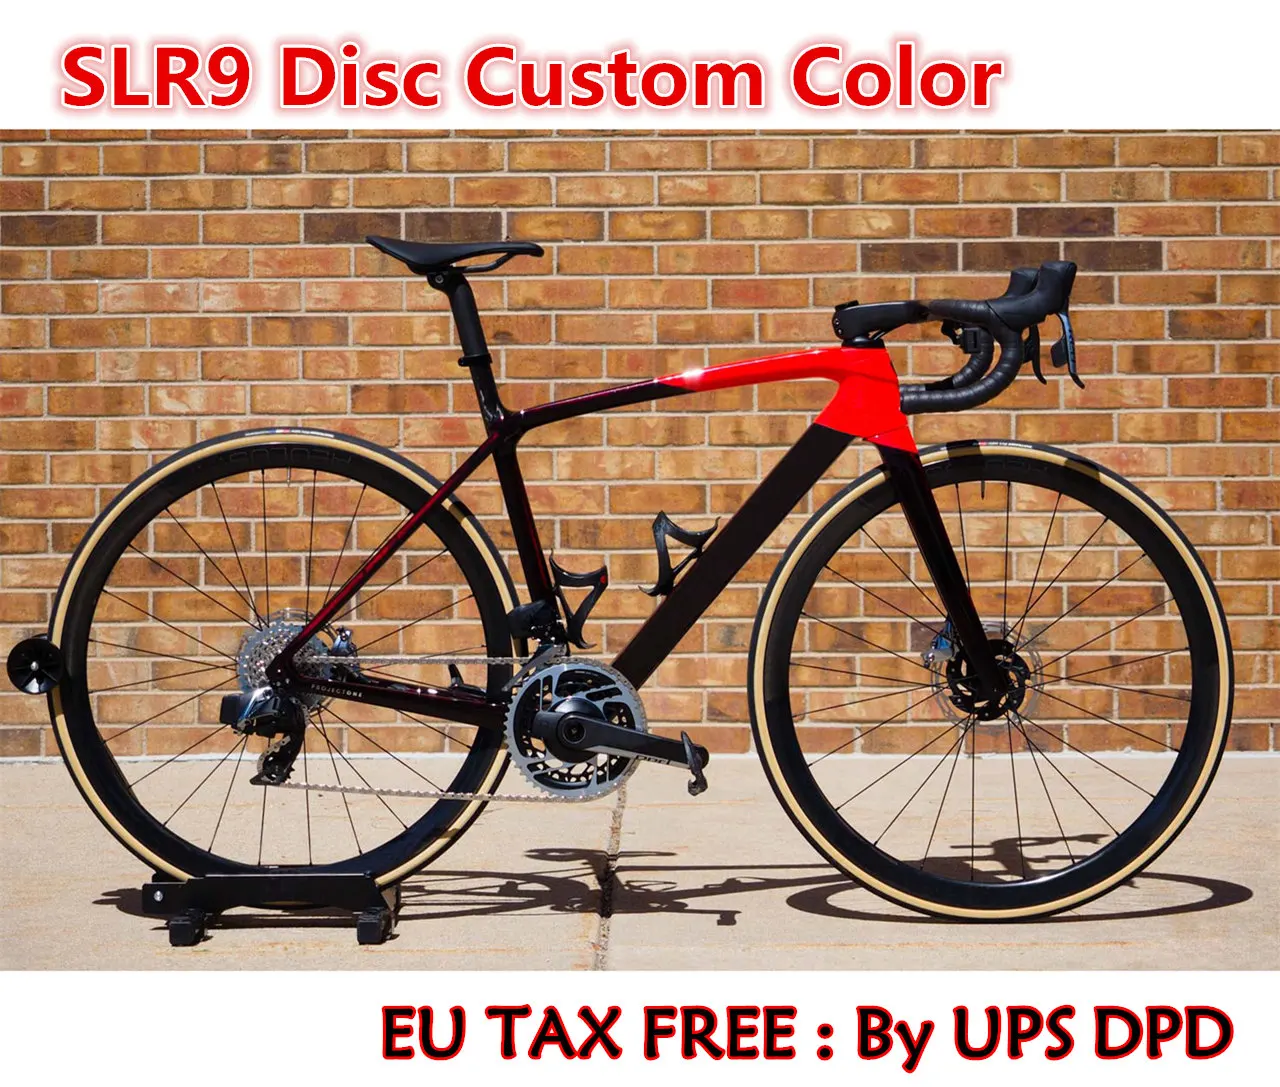 

10 Color SLR 9 Disk Complete Bike Carbon Road Bicycle with 105 R7020 ULTEGRA R8020 Groupset 50mm Disc Wheels Ship by UPS DPD XDB